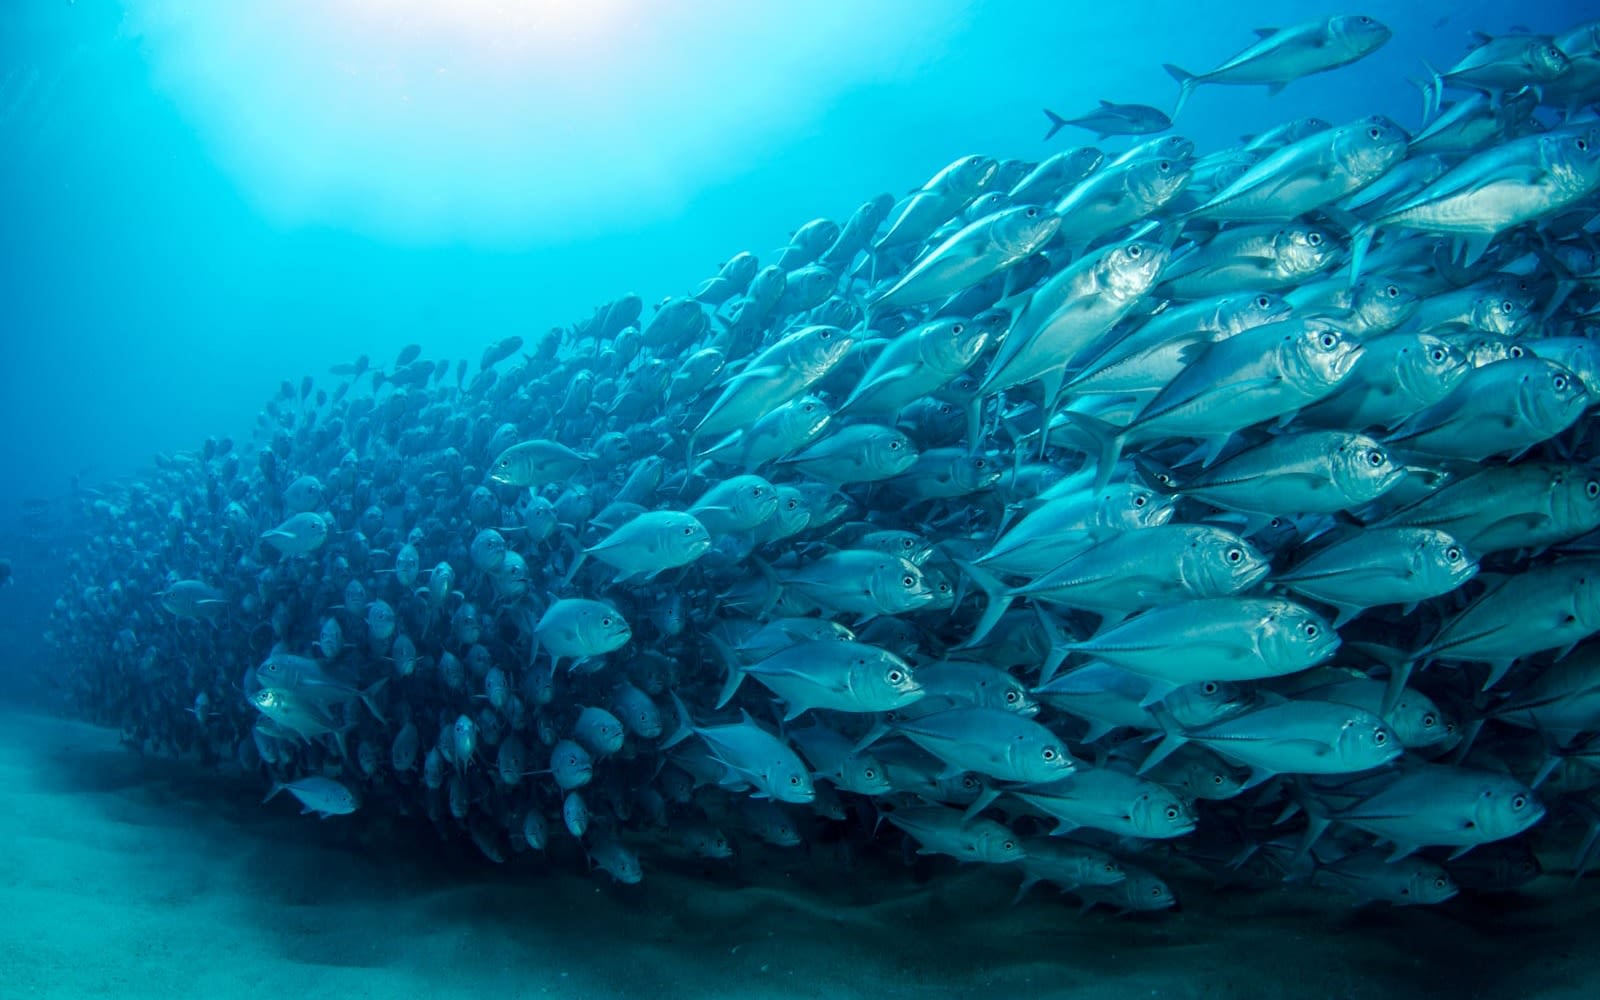 big shoal of fish in the clear blue sea